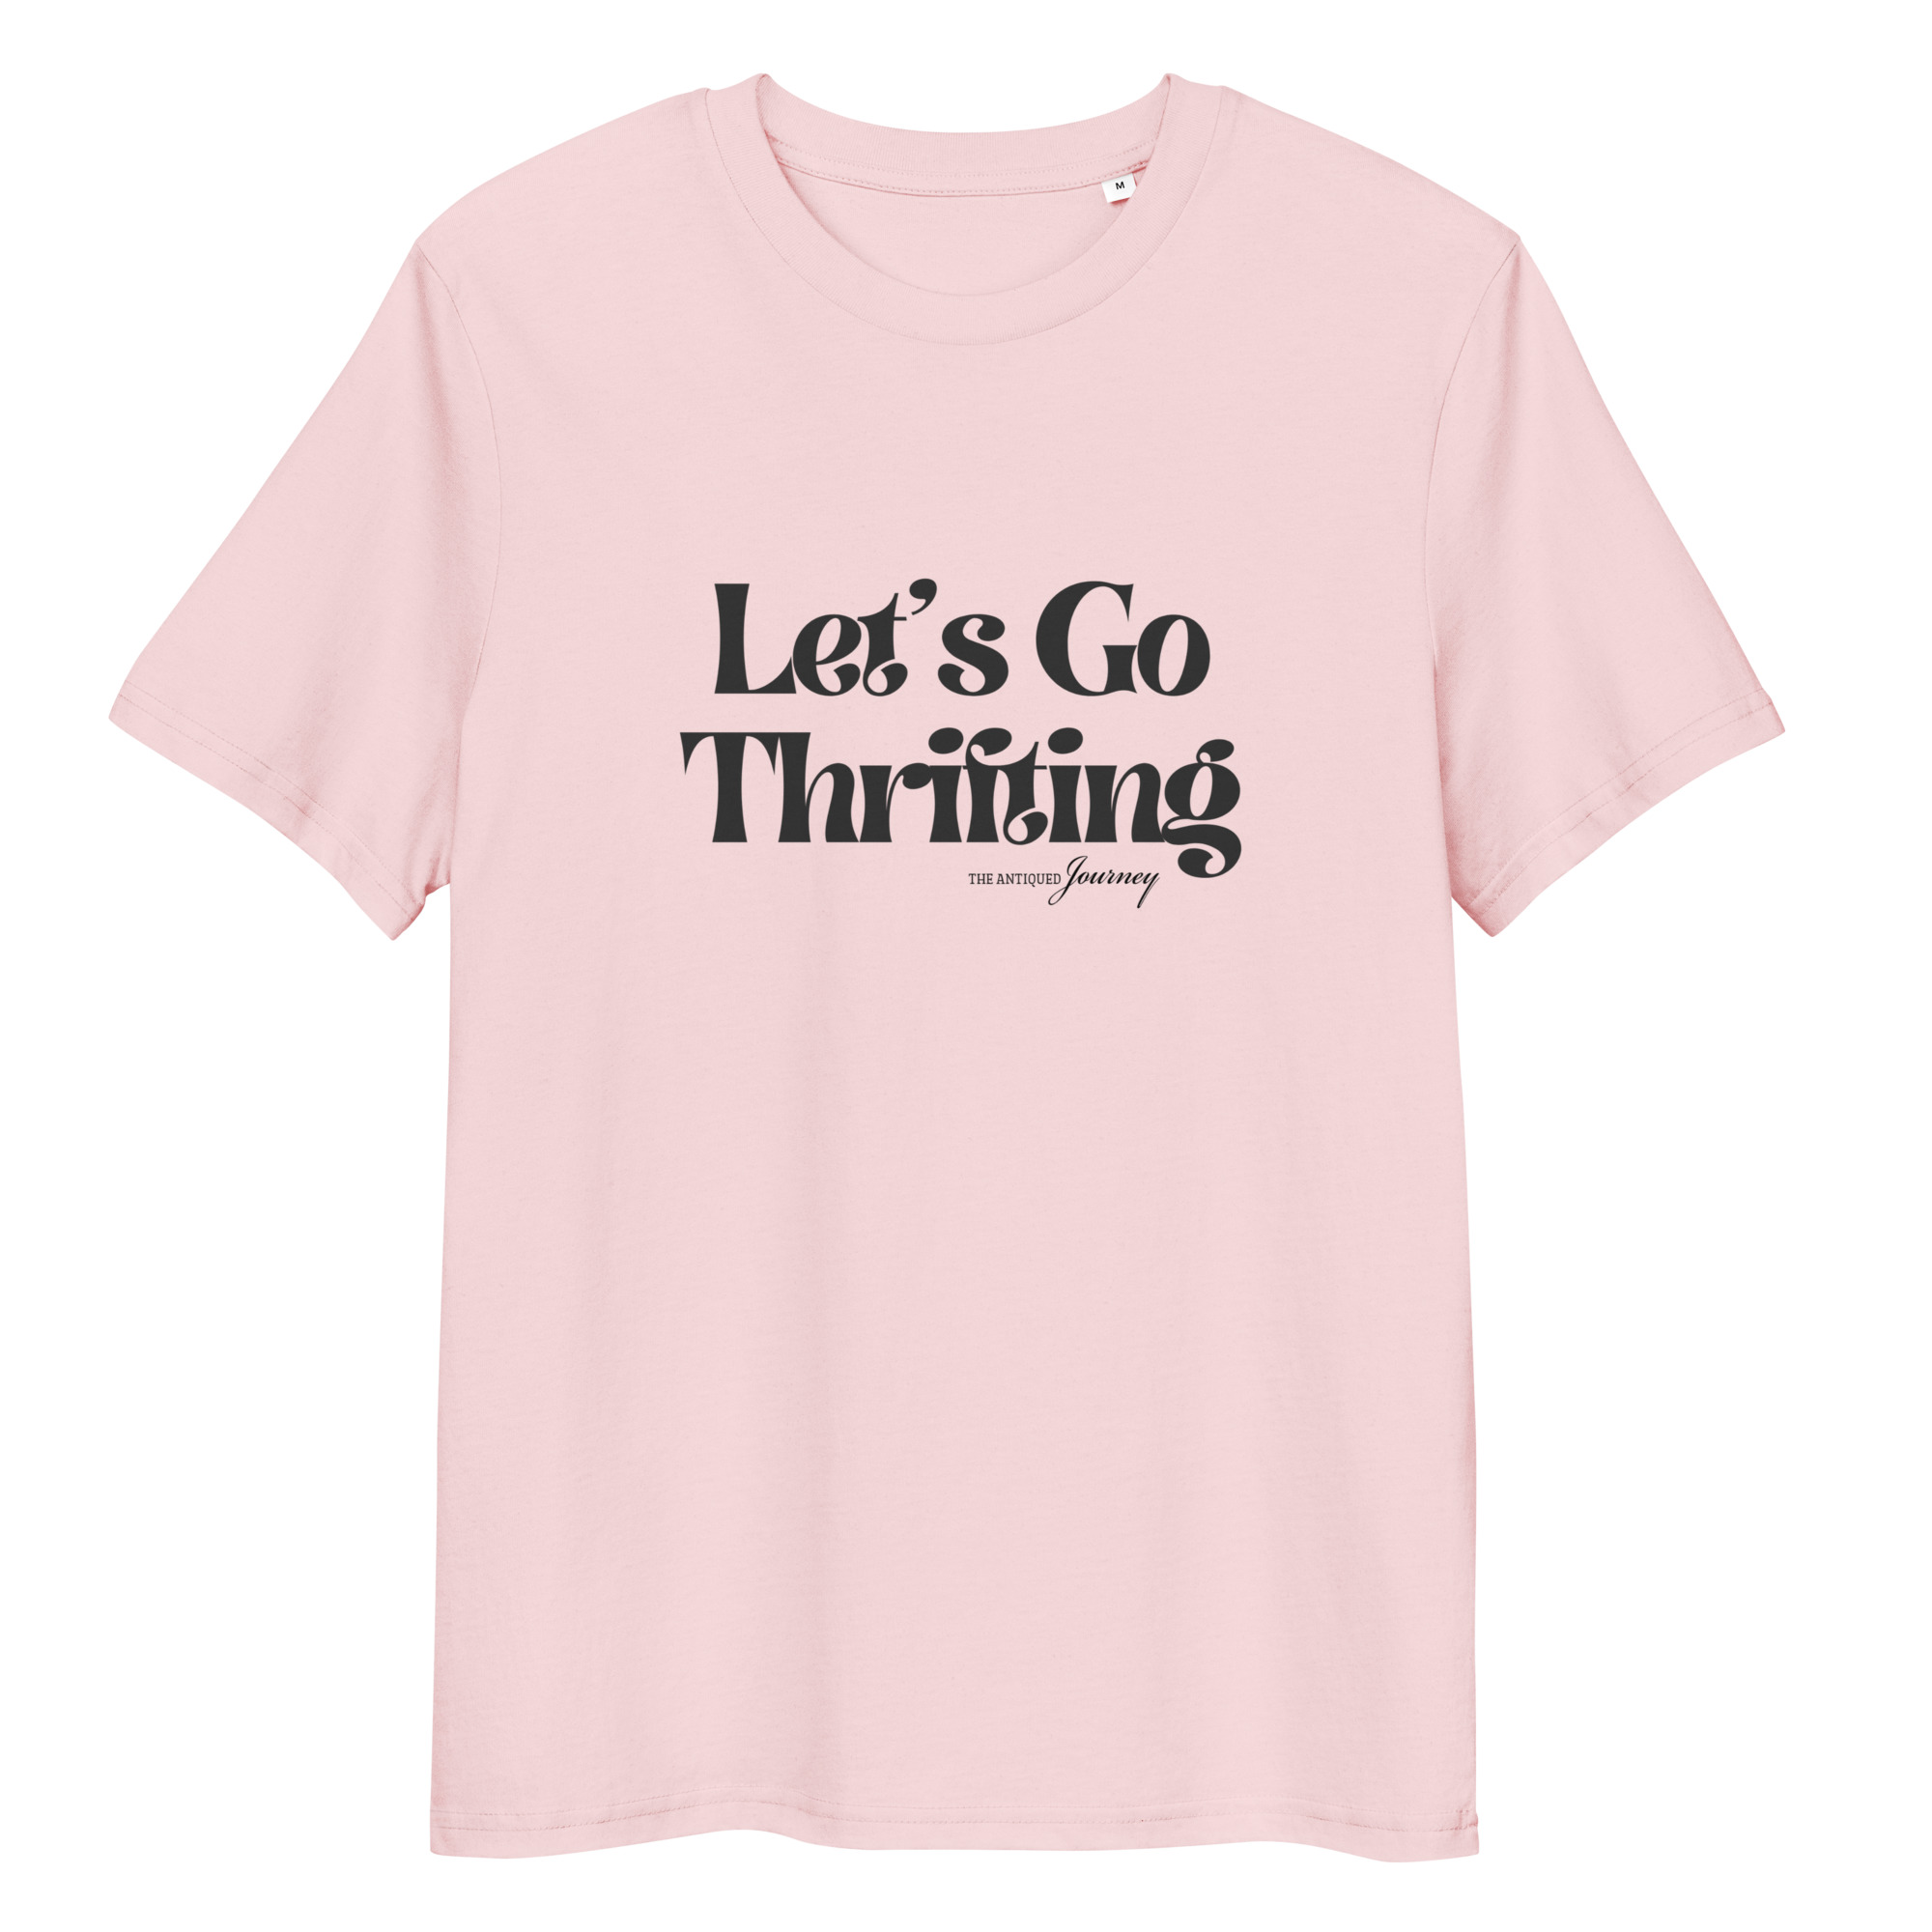 Let's go Thrifting t-shirt from The Antiqued Journey